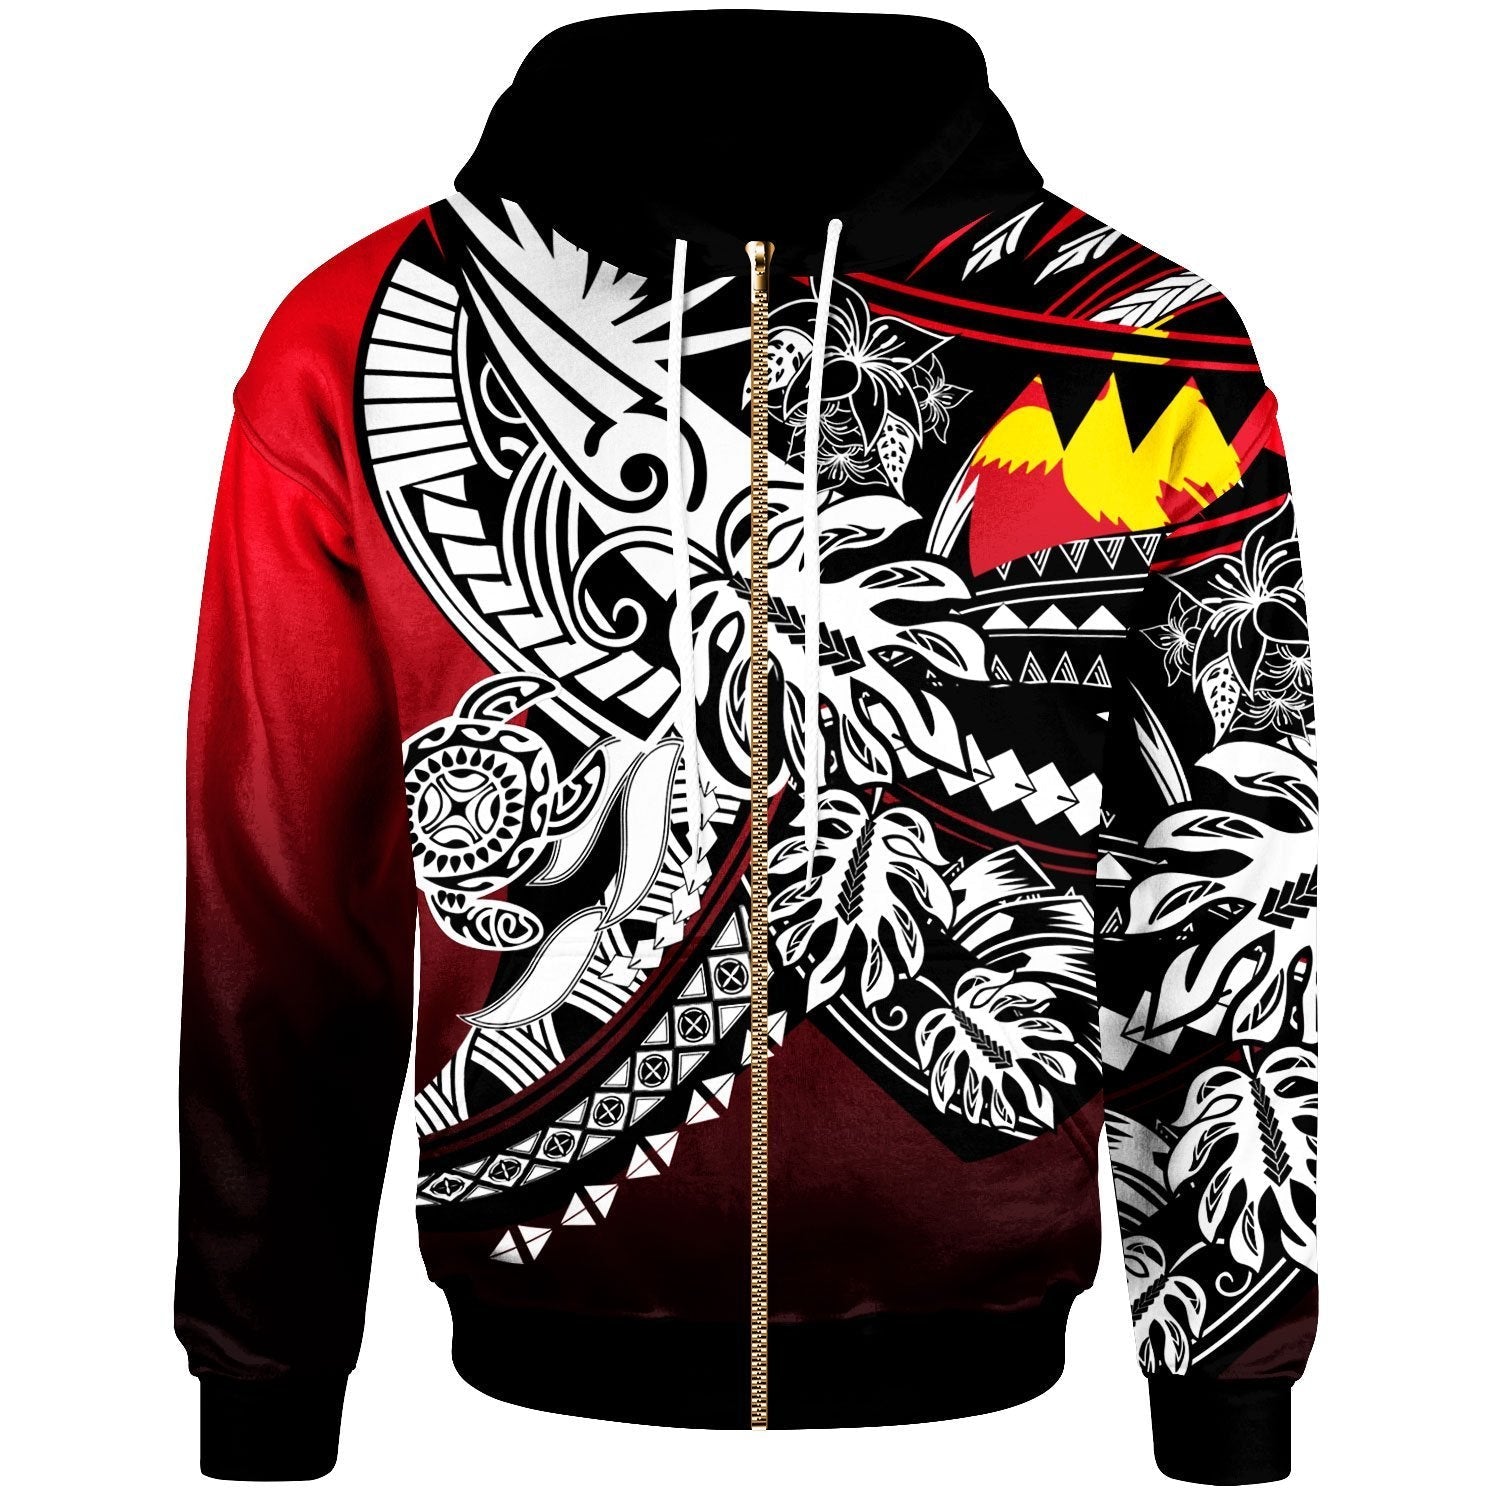 papua-new-guinea-zip-hoodie-tribal-jungle-pattern-red-color